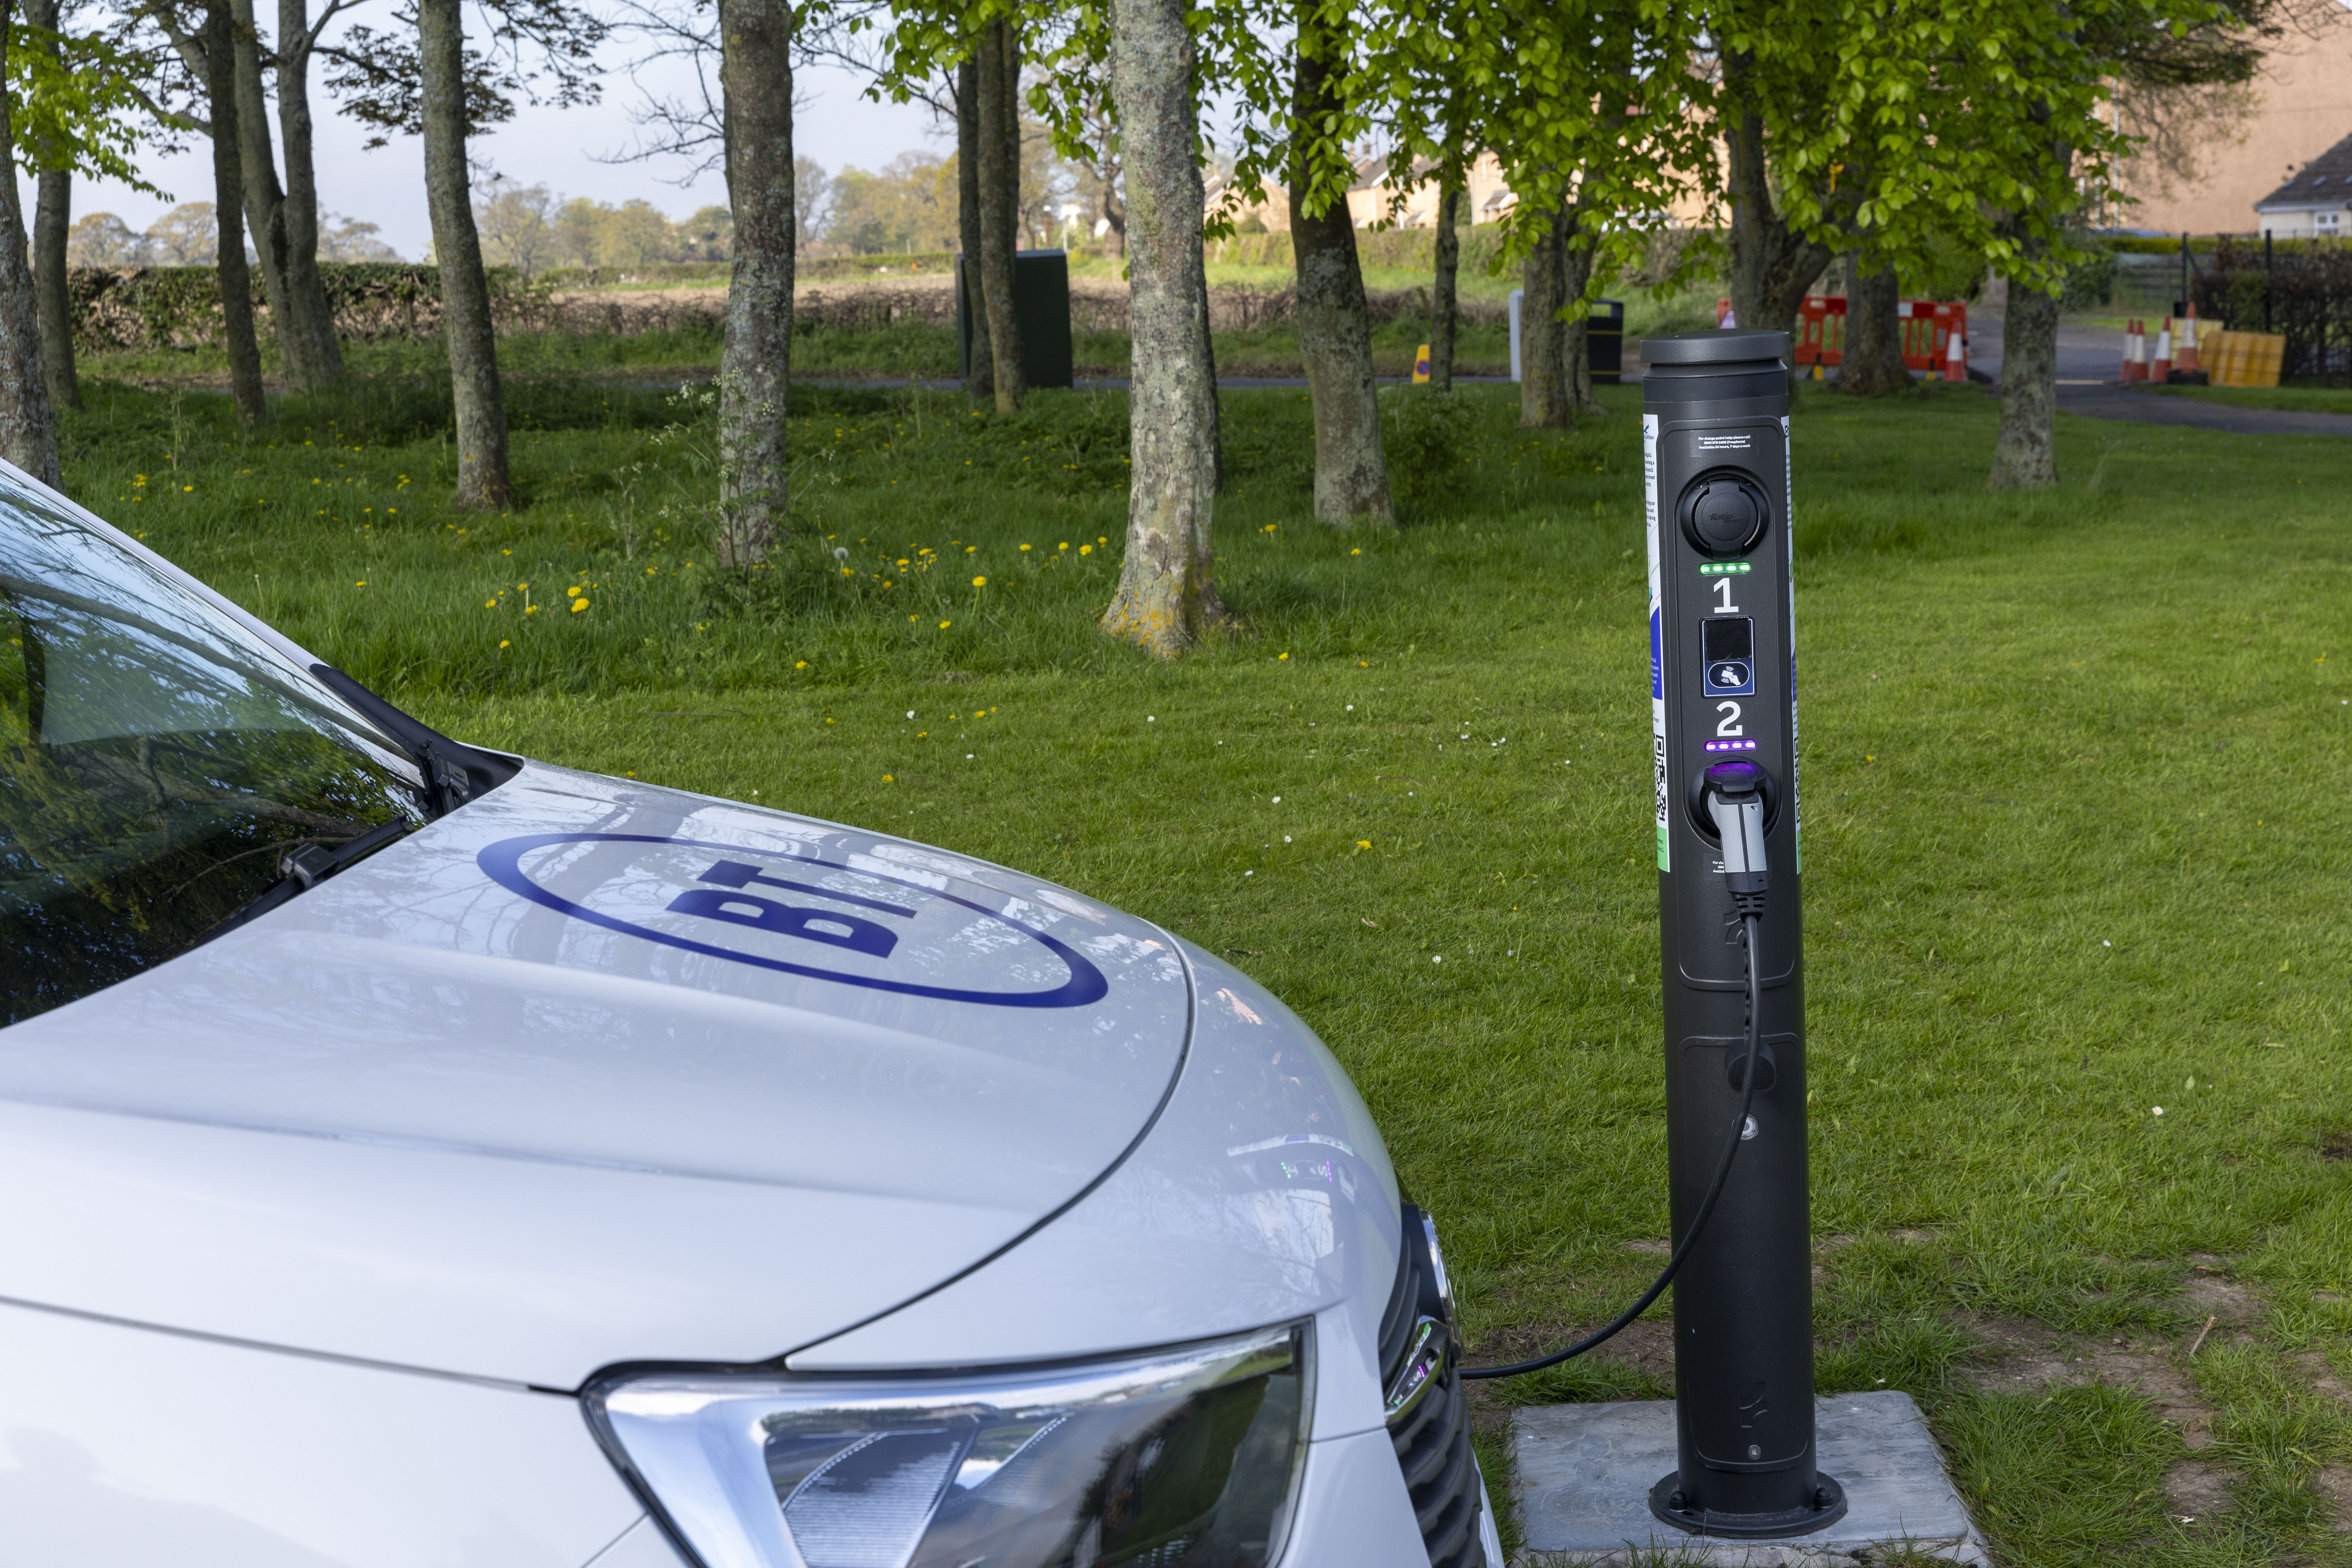 BT powers up Scotland's first EV charger transformed from green street cabinet